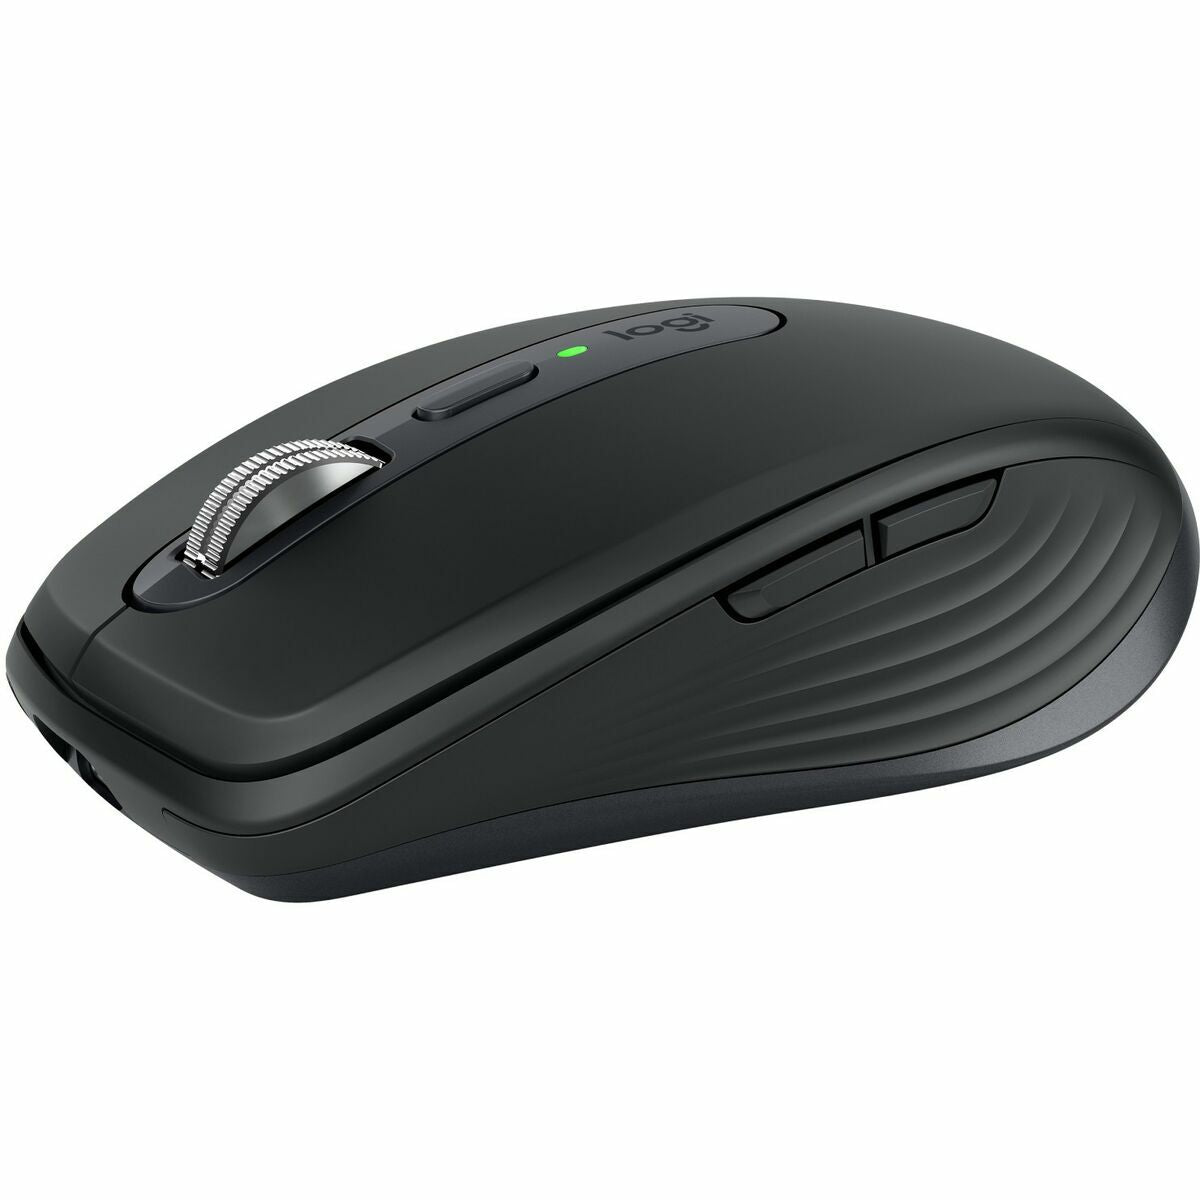 Mouse Logitech MX Anywhere 3S Grey Graphite, Logitech, Computing, Accessories, mouse-logitech-mx-anywhere-3s-grey-graphite, Brand_Logitech, category-reference-2609, category-reference-2642, category-reference-2656, category-reference-t-19685, category-reference-t-19908, category-reference-t-21353, computers / peripherals, Condition_NEW, office, Price_100 - 200, Teleworking, RiotNook